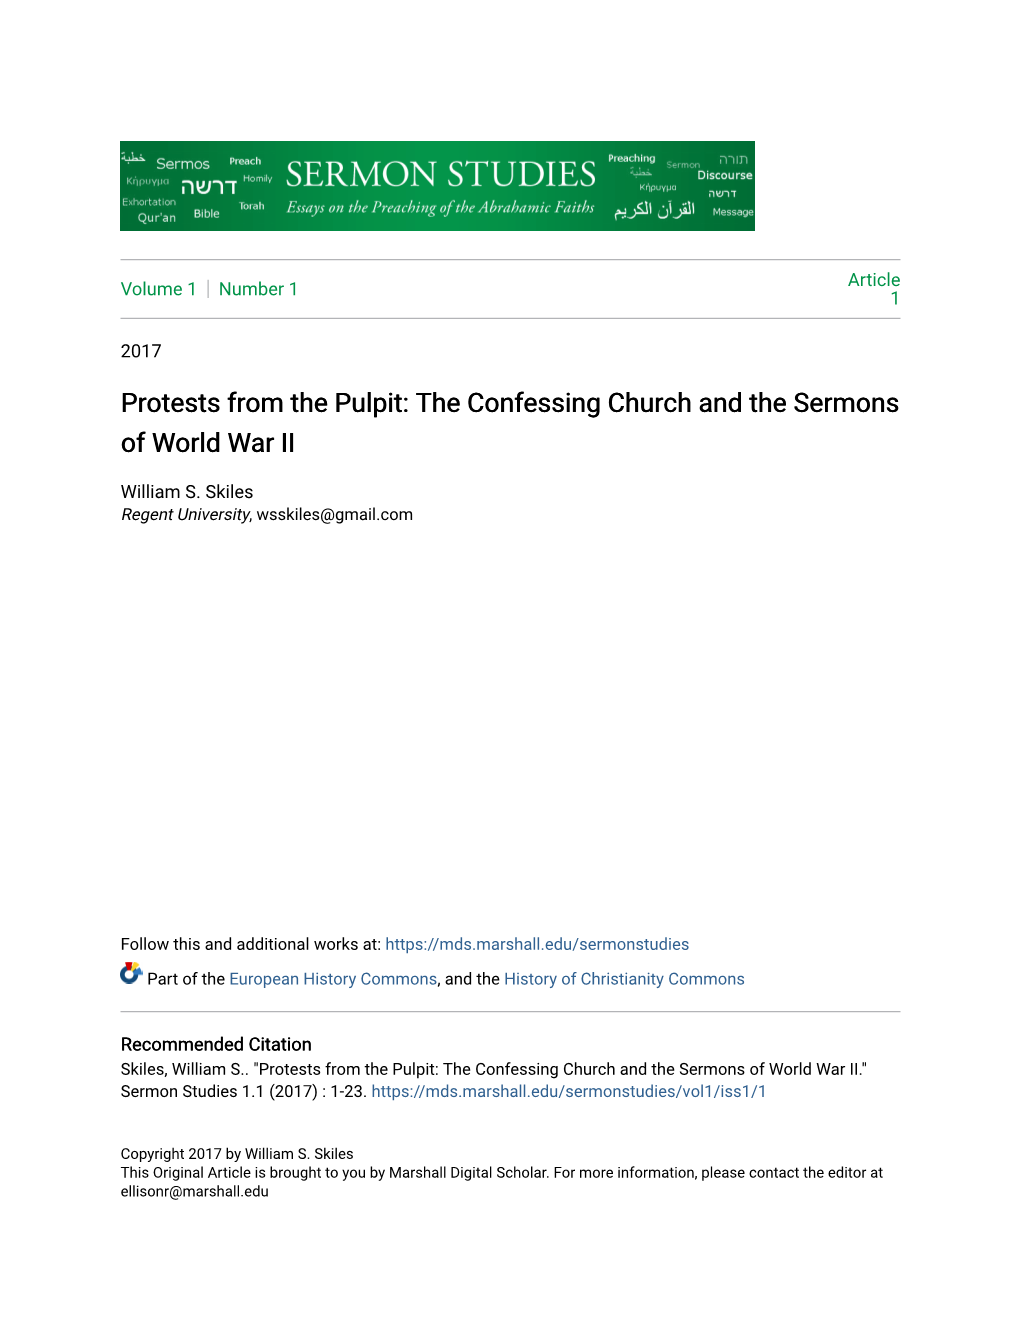 The Confessing Church and the Sermons of World War II